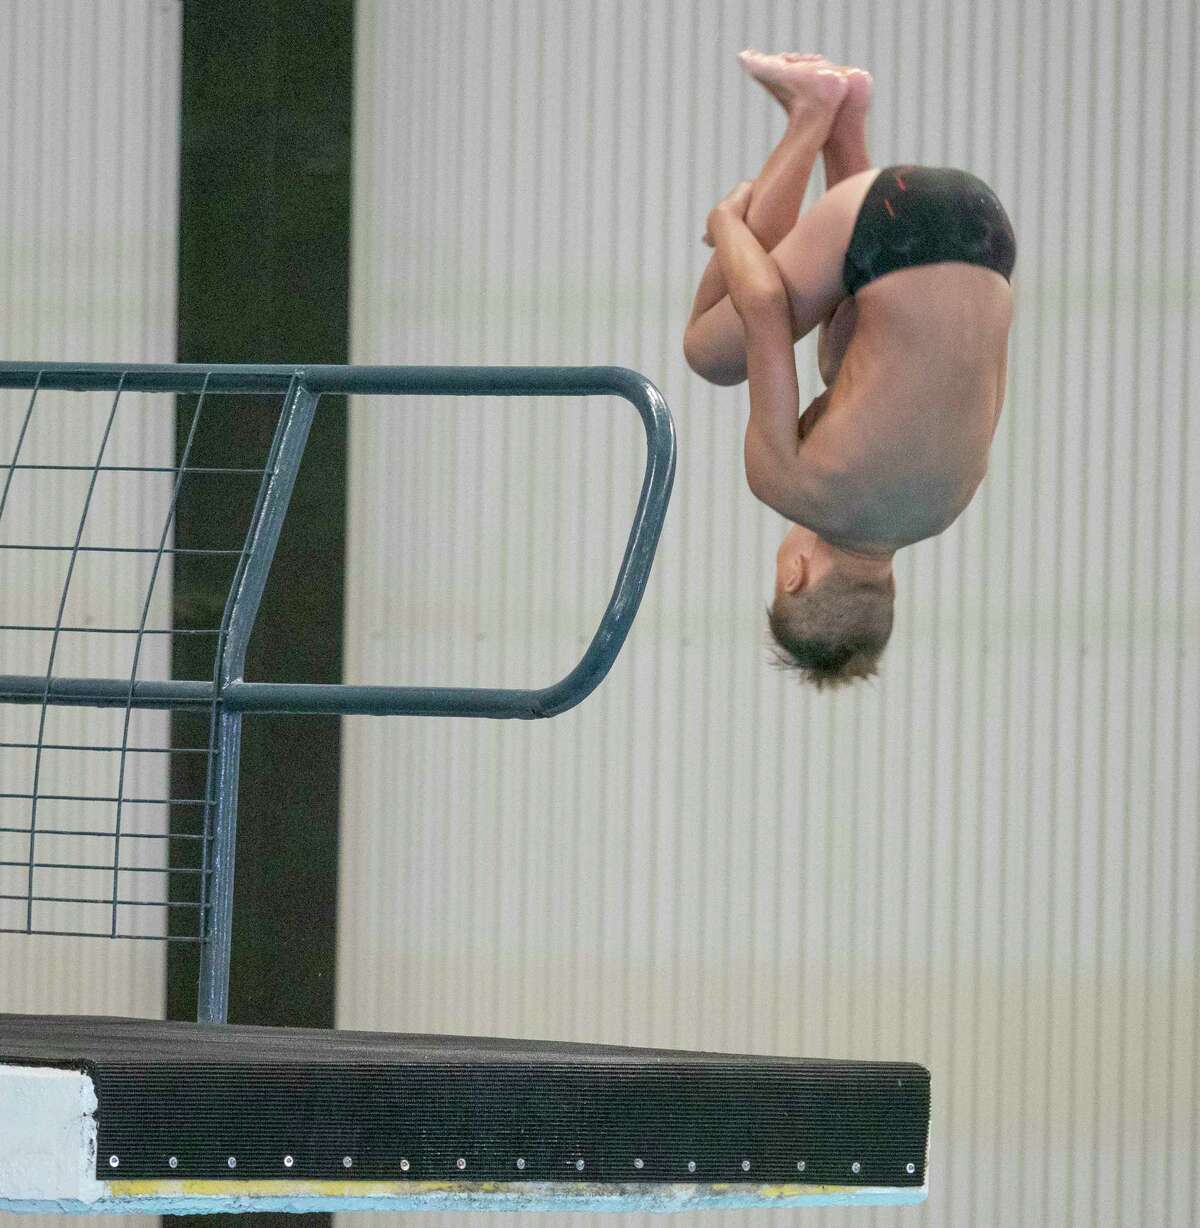 USA Diving Junior National Championships Day 1 results